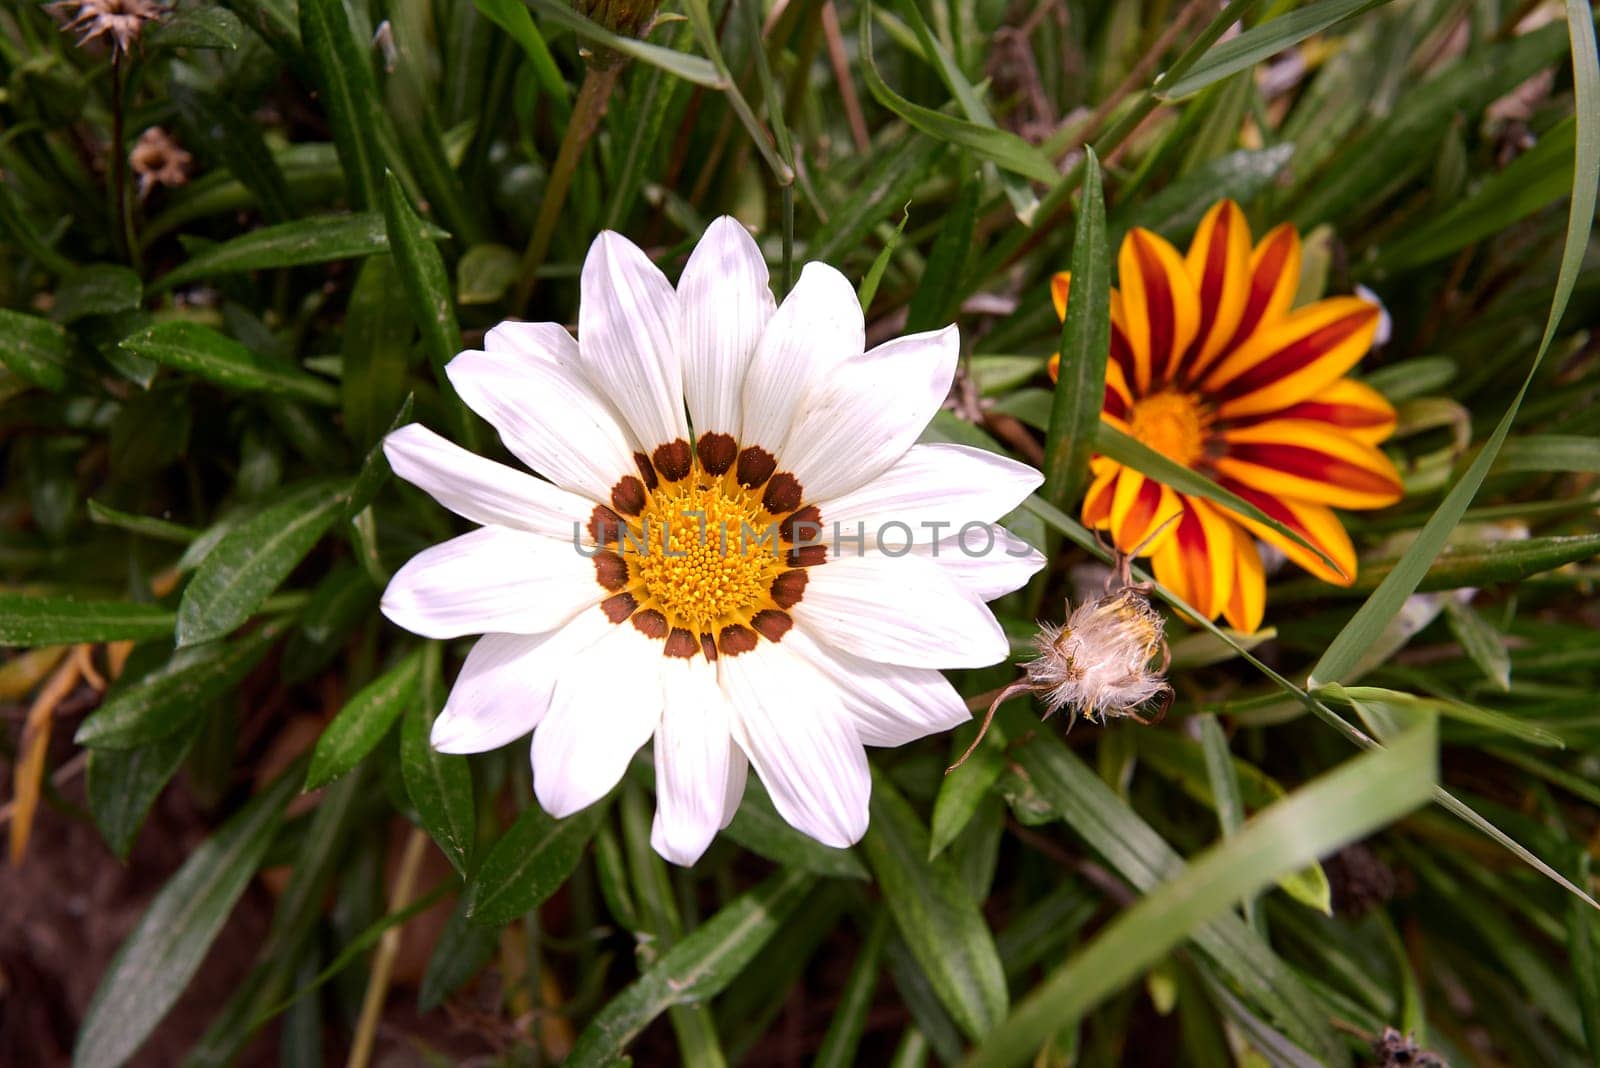 Group of two Indian flowers, orange and white by raul_ruiz